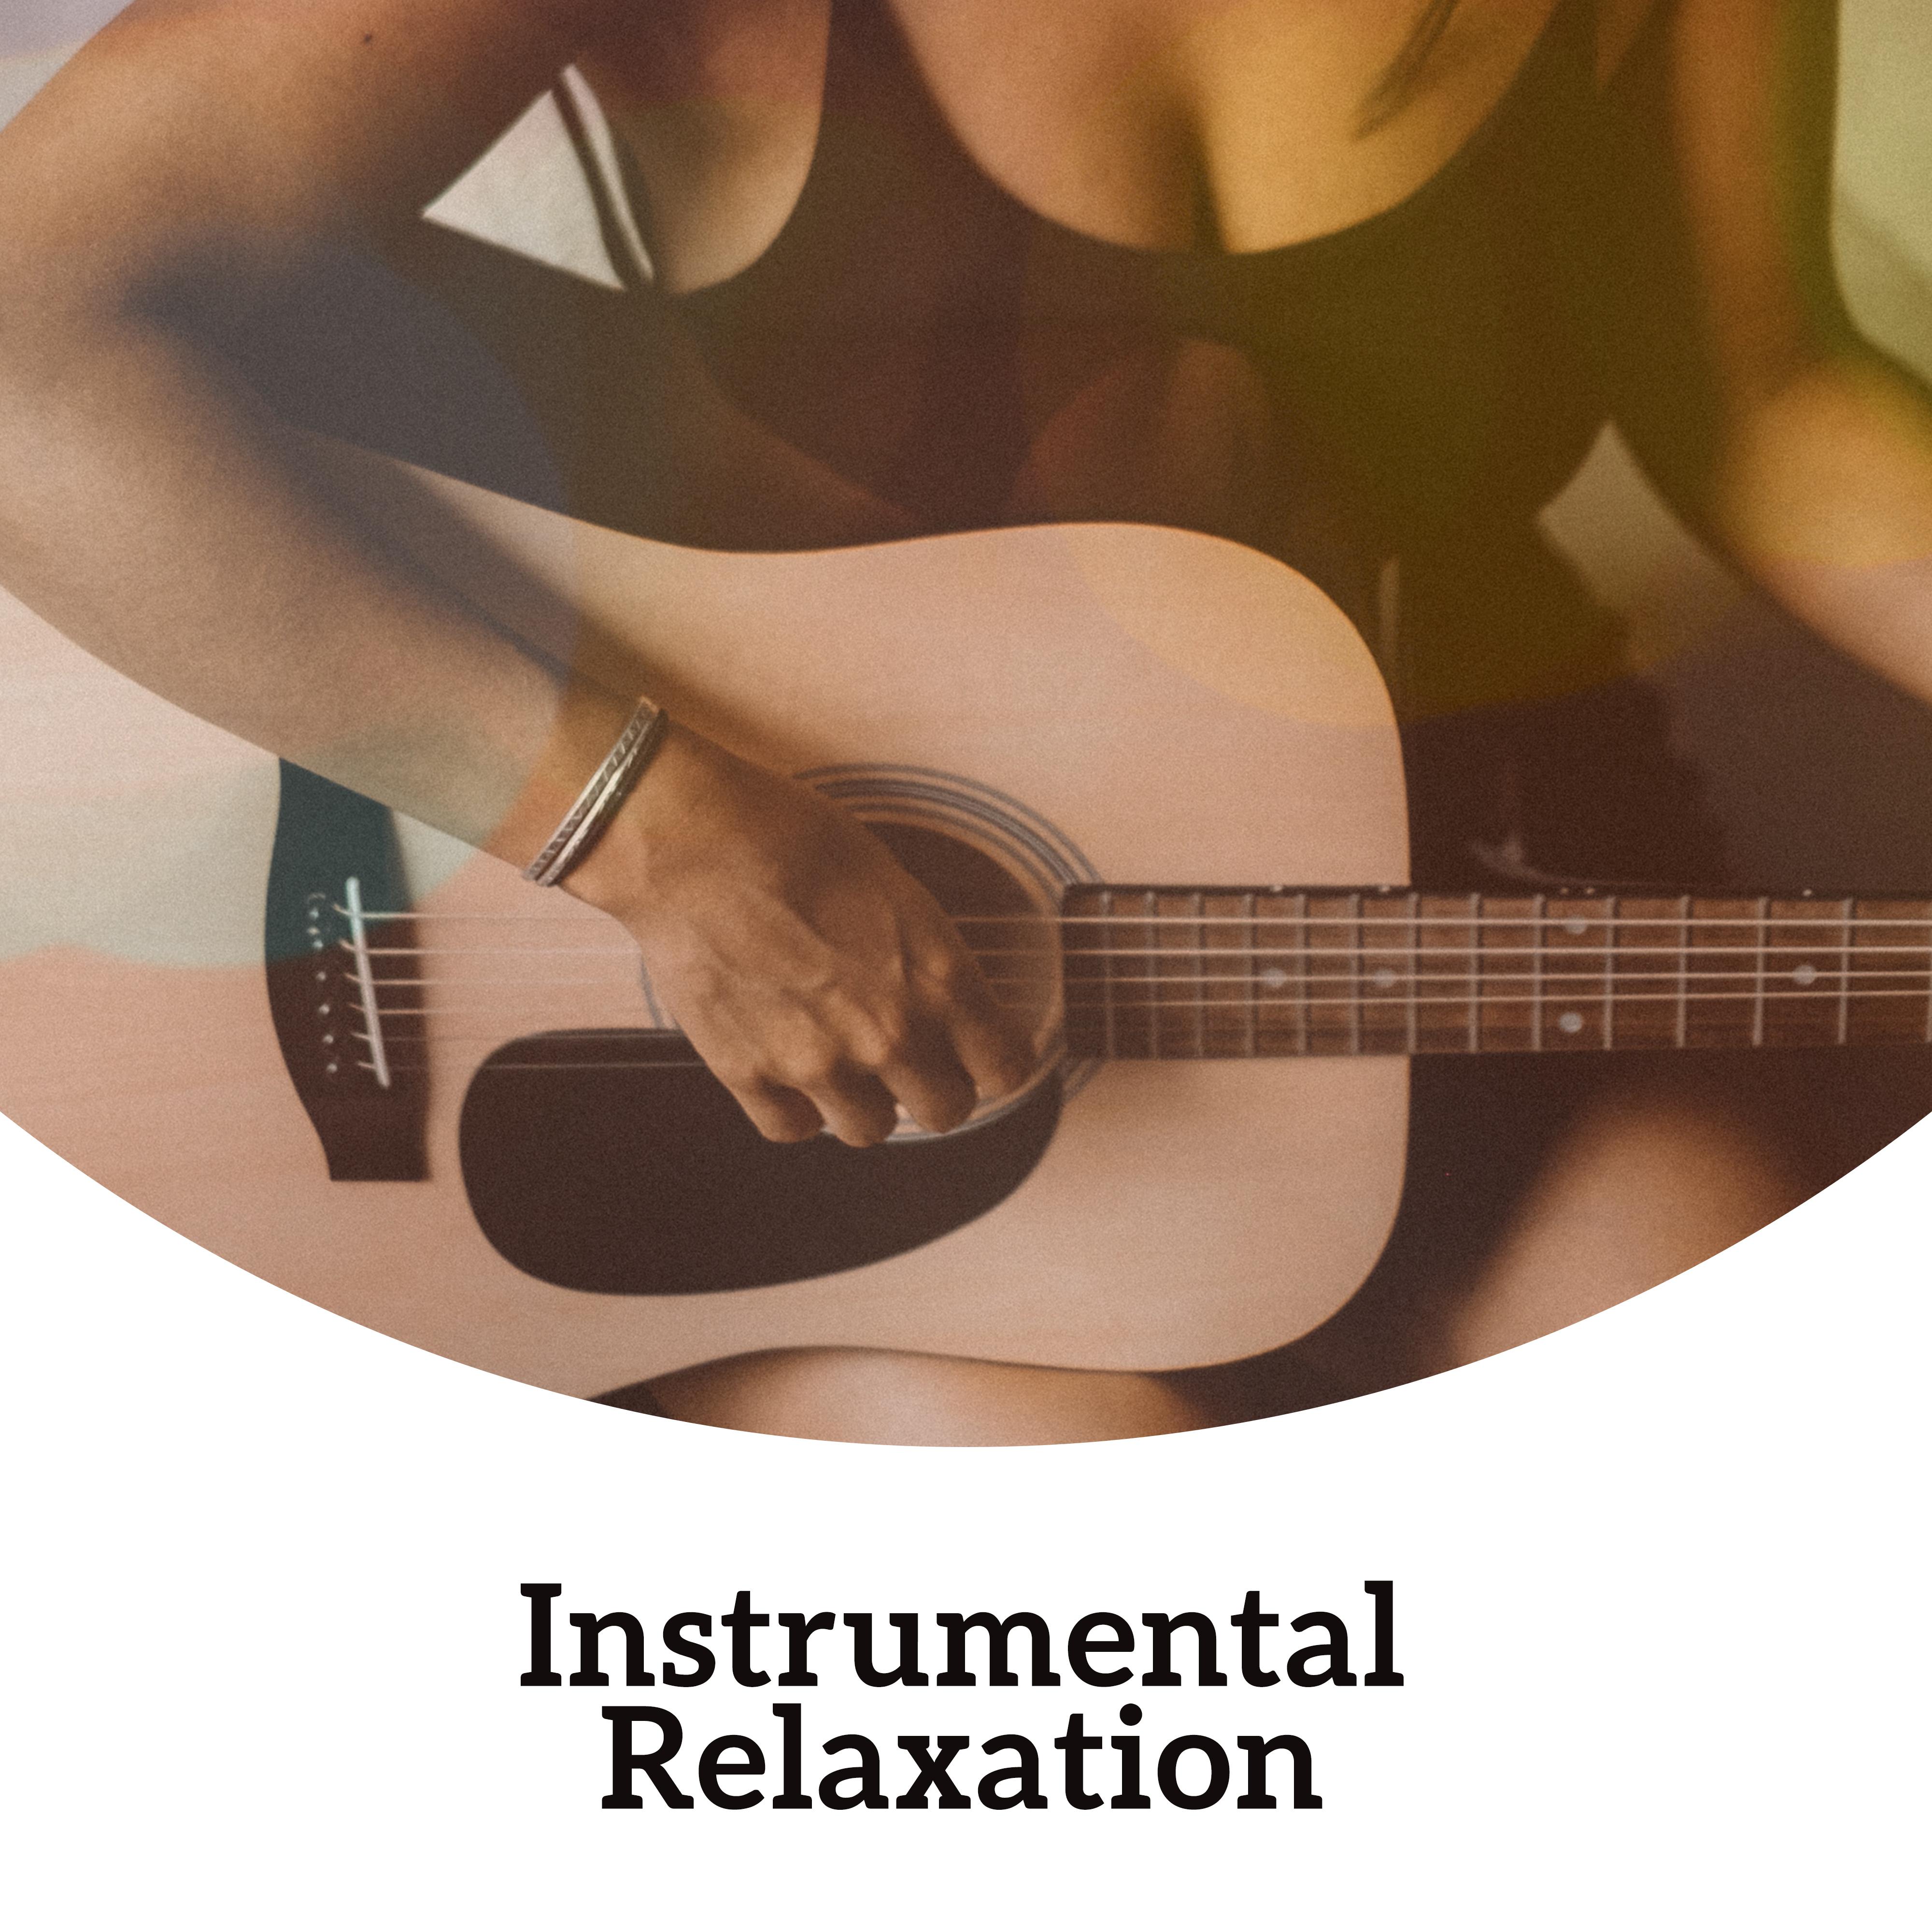 Instrumental Relaxation – Zen Sounds, Energy for Mind, Sounds of Nature Reduce Stress, New Age